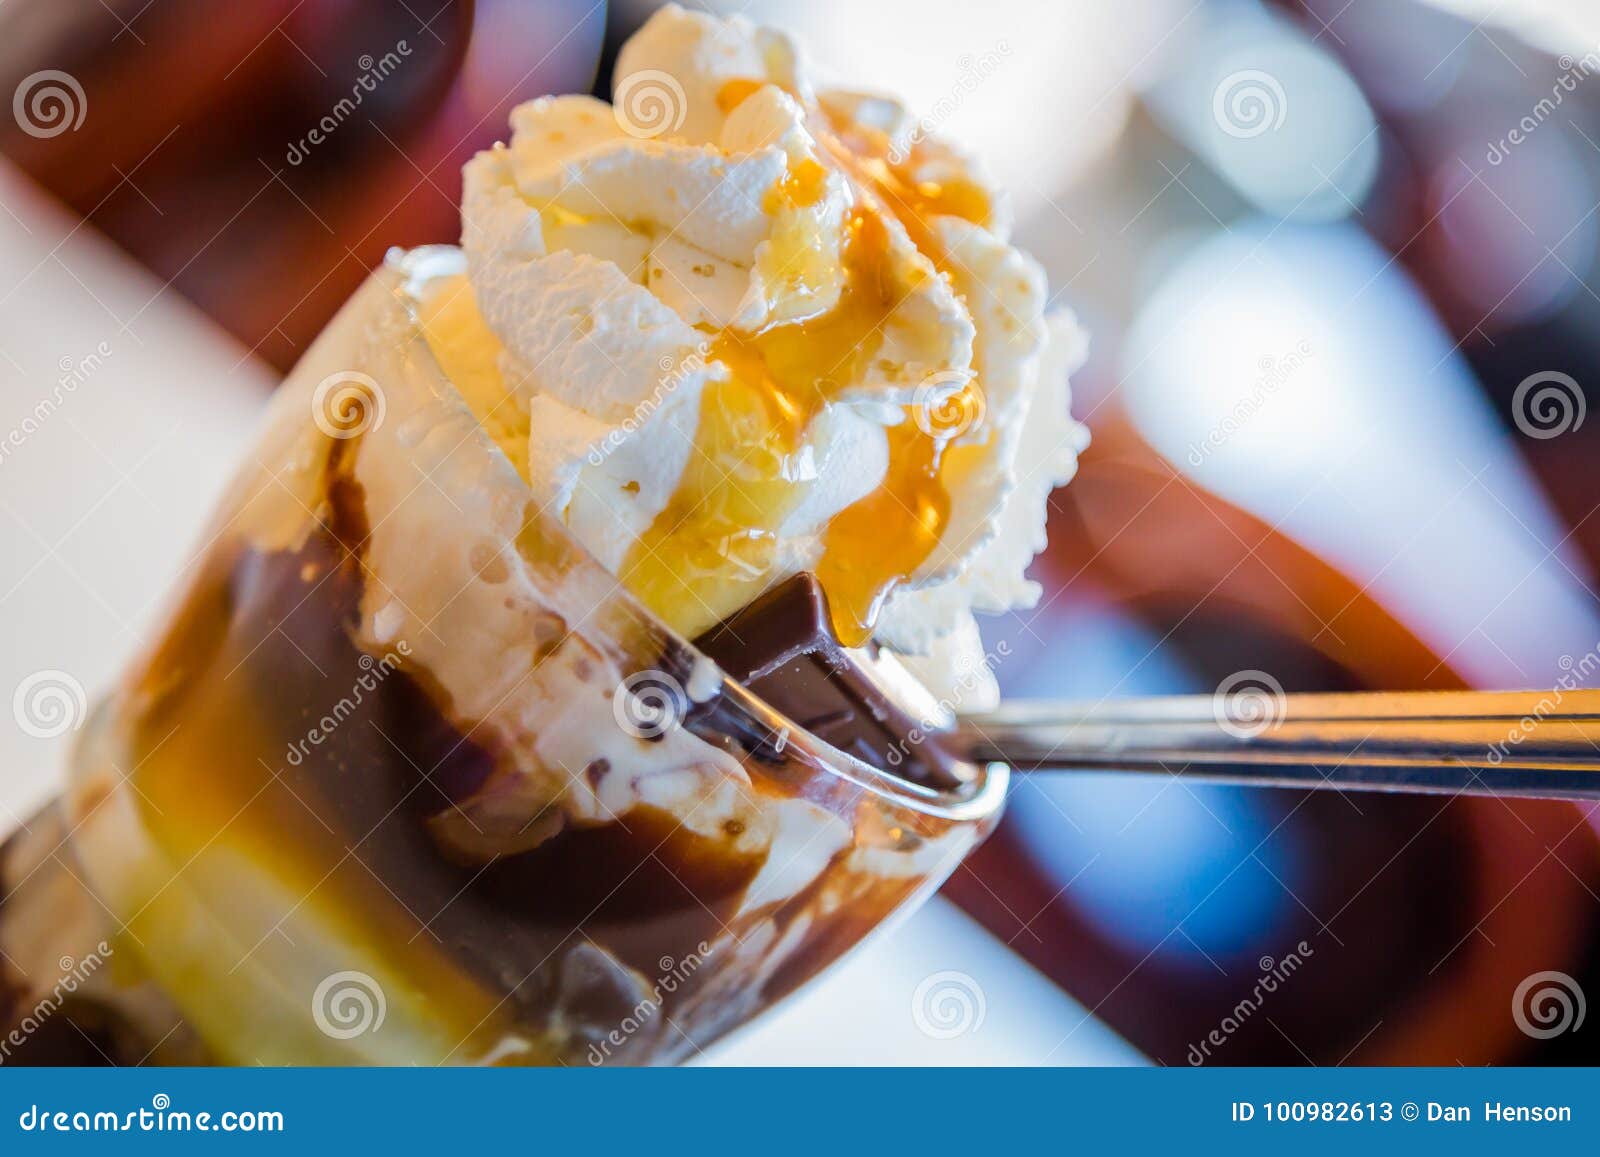 ice cream with whipped cream and toffee sauce